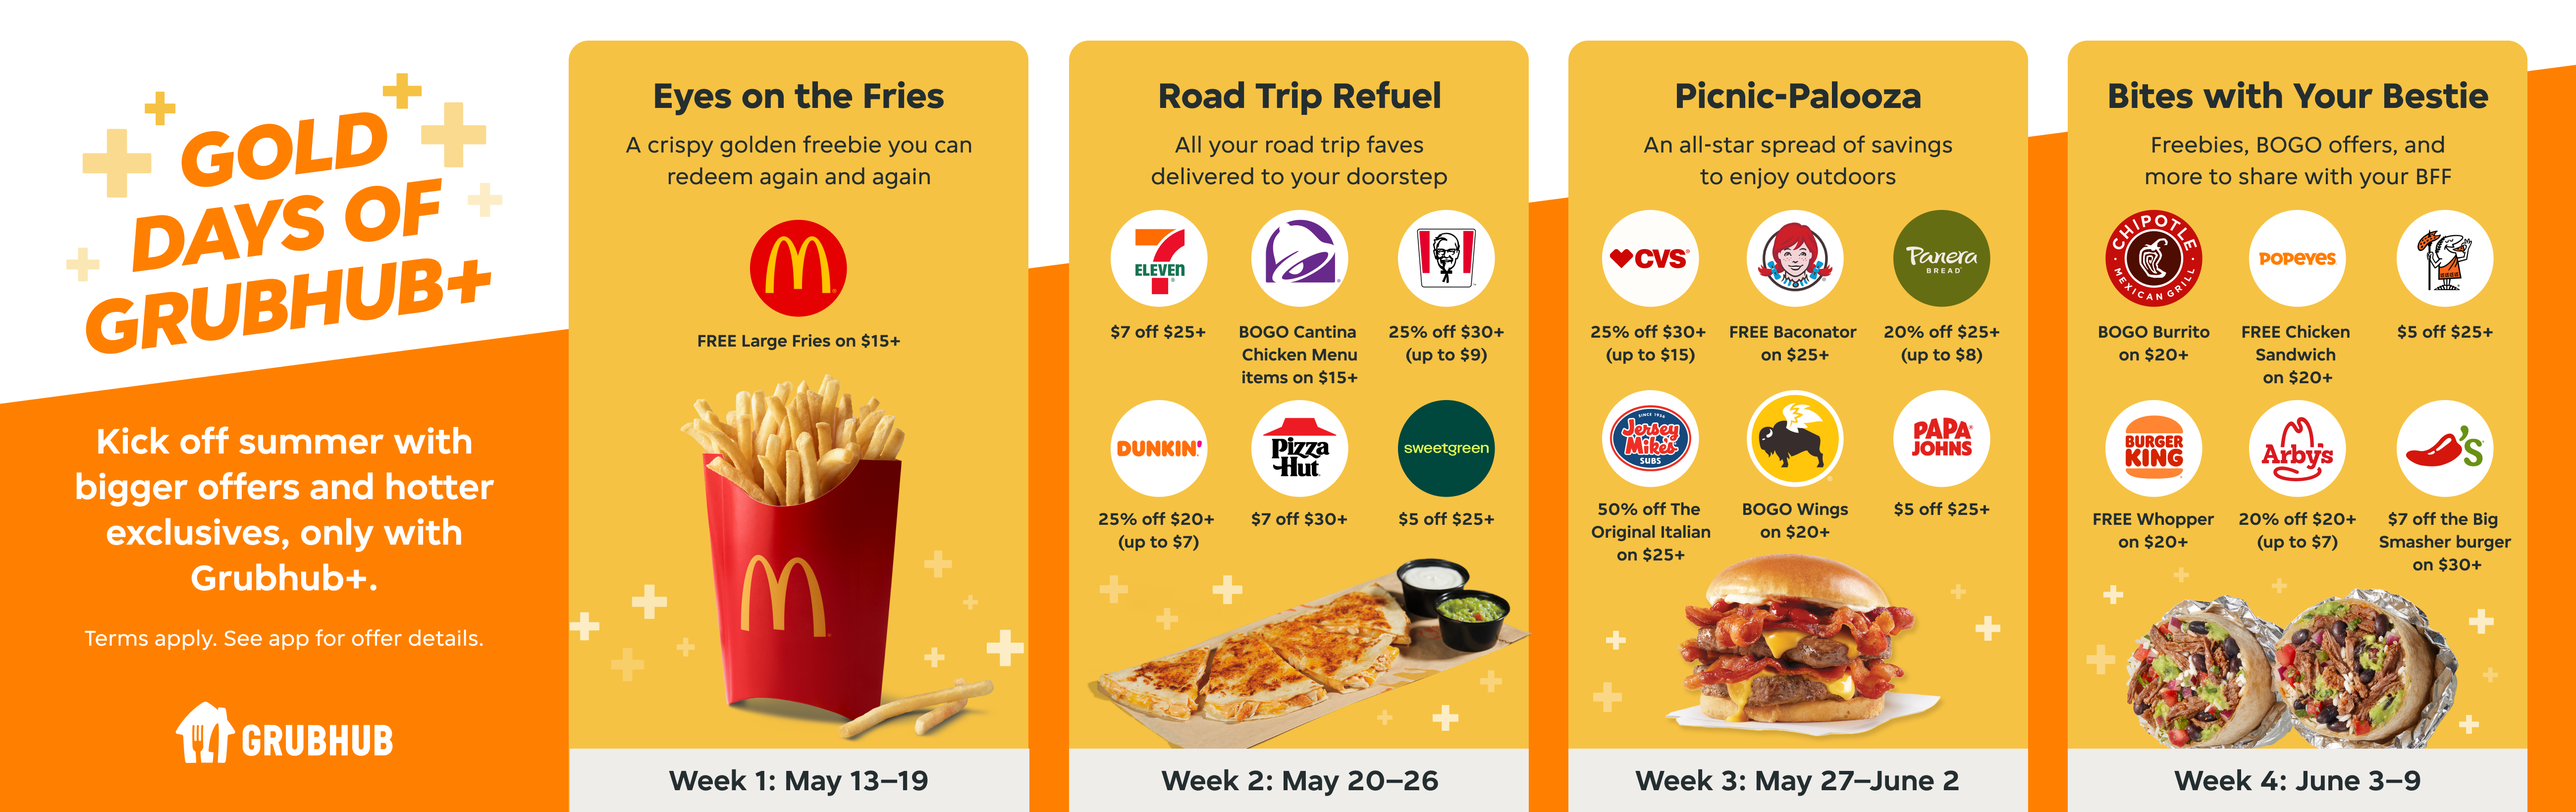 Gold Days of Grubhub+ Returns with Four Weeks of Exclusive Perks and Deals on Food and Convenience Favorites